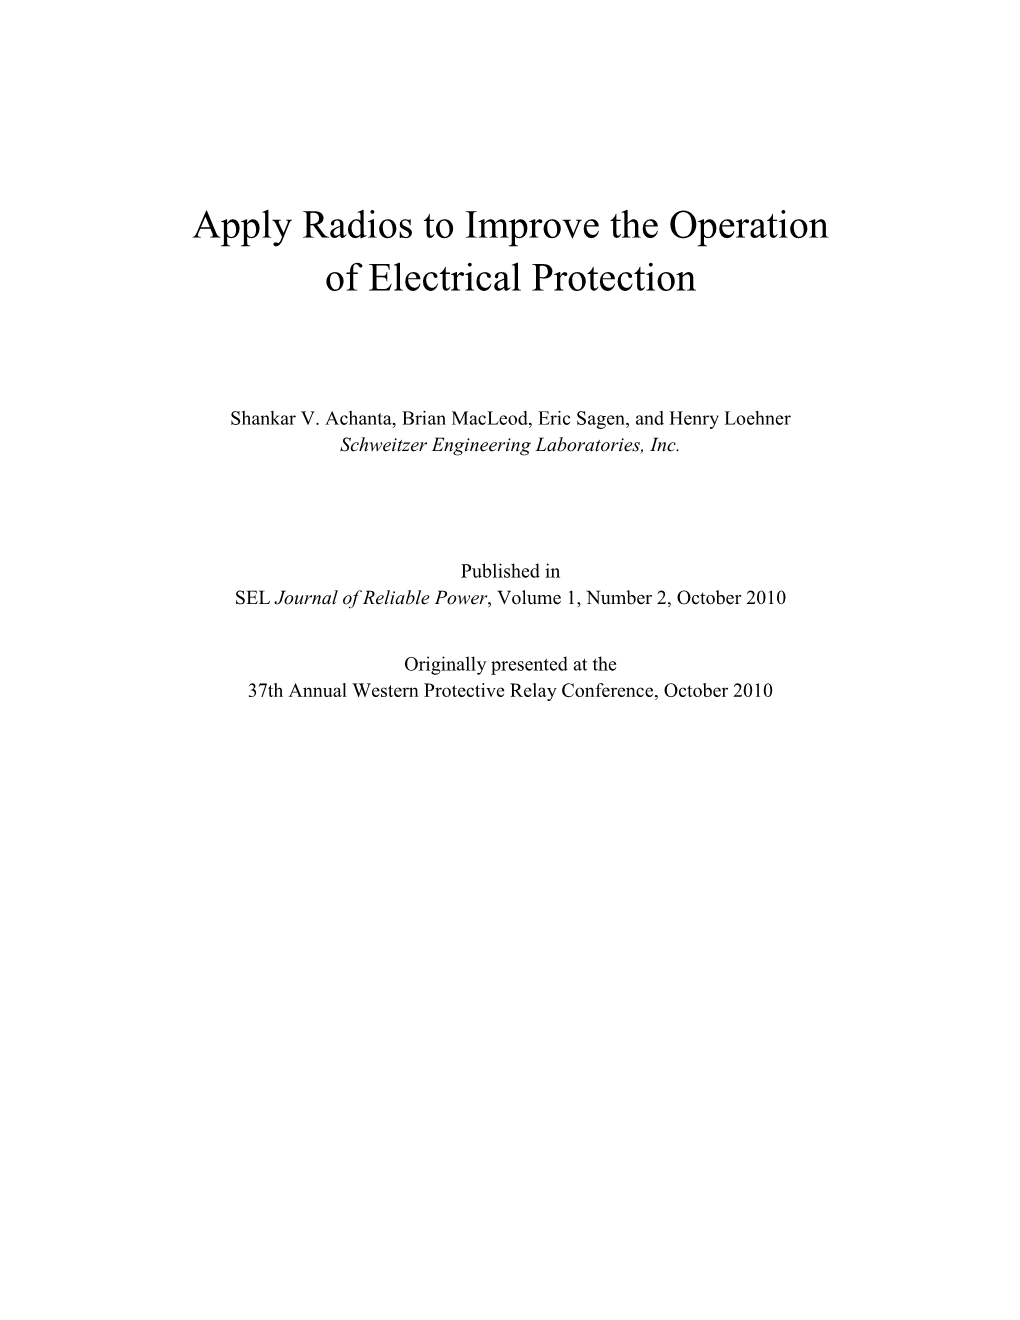 Apply Radios to Improve the Operation of Electrical Protection